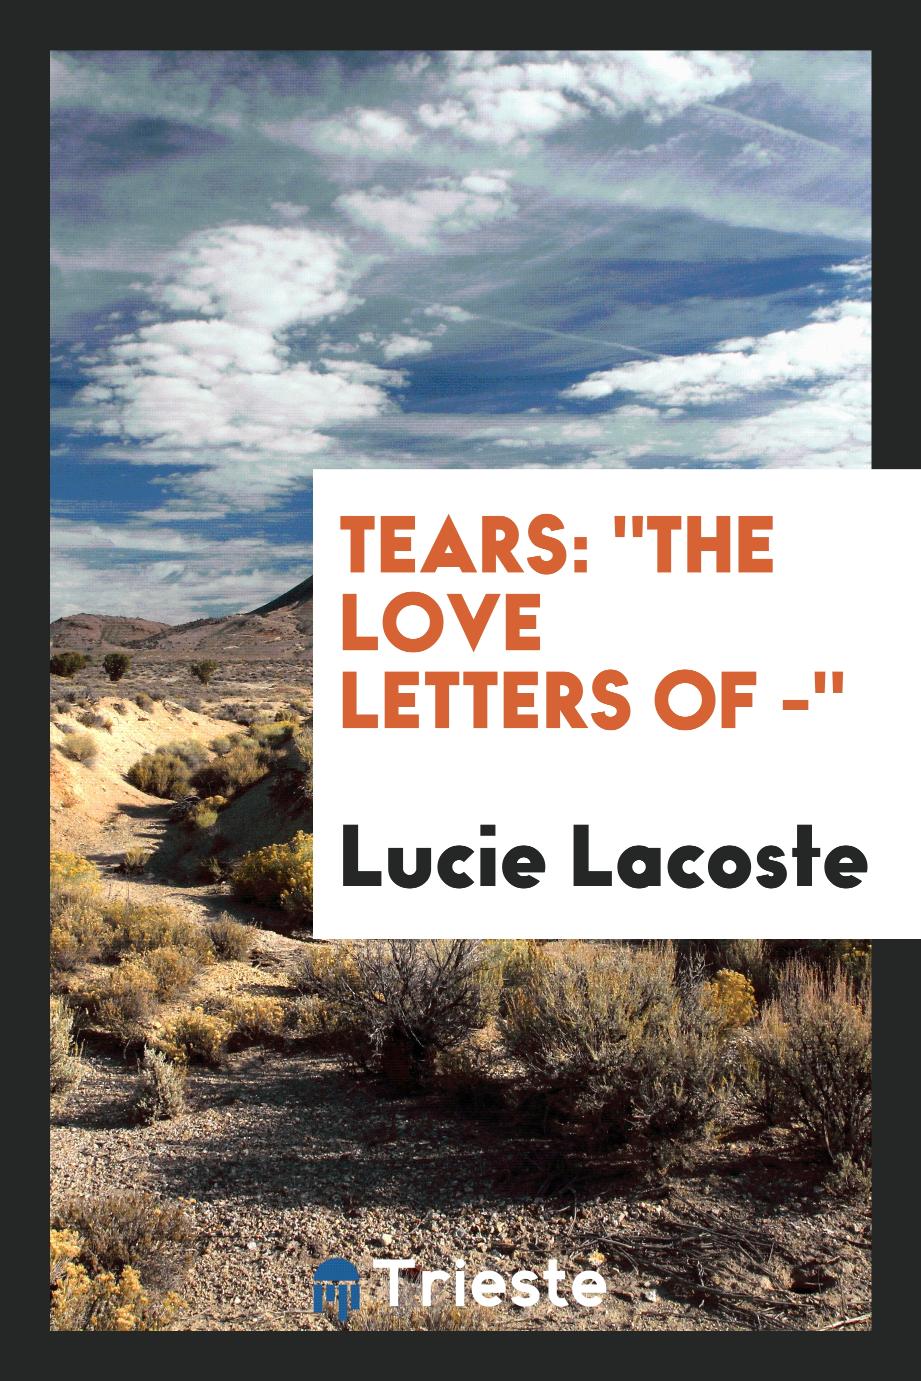 Tears: "The Love Letters of -"